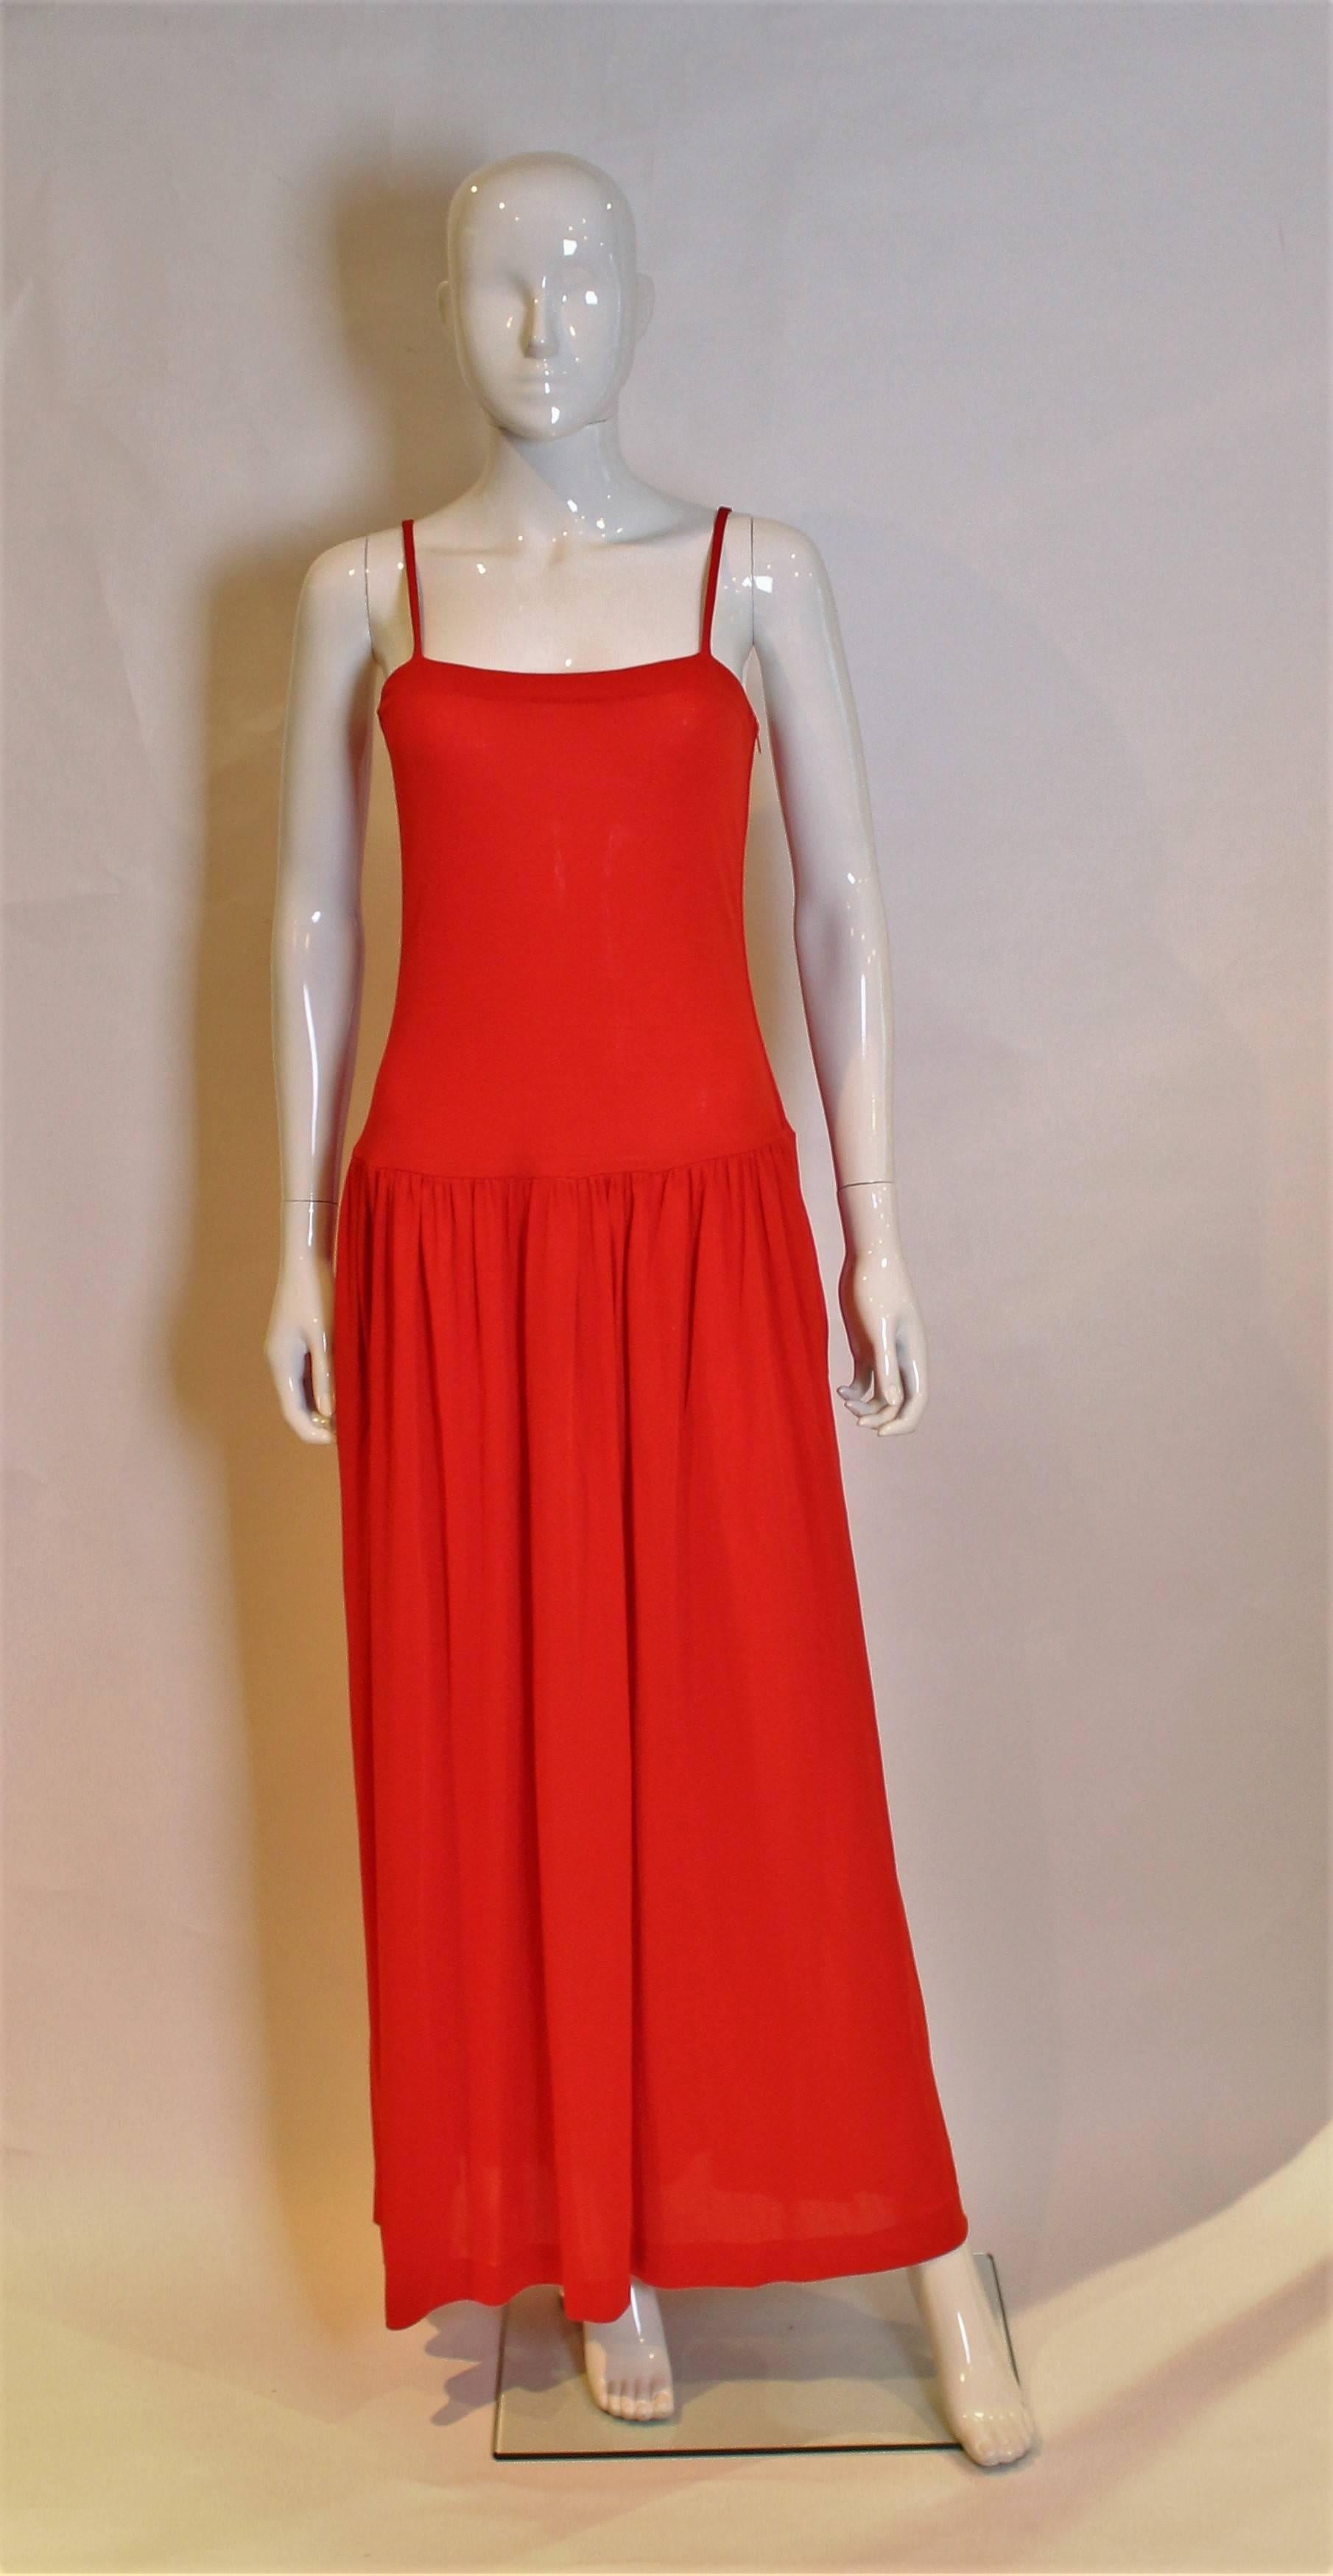 Christian Dior Red Boutique Paris Dress and Evening Top In Excellent Condition For Sale In London, GB